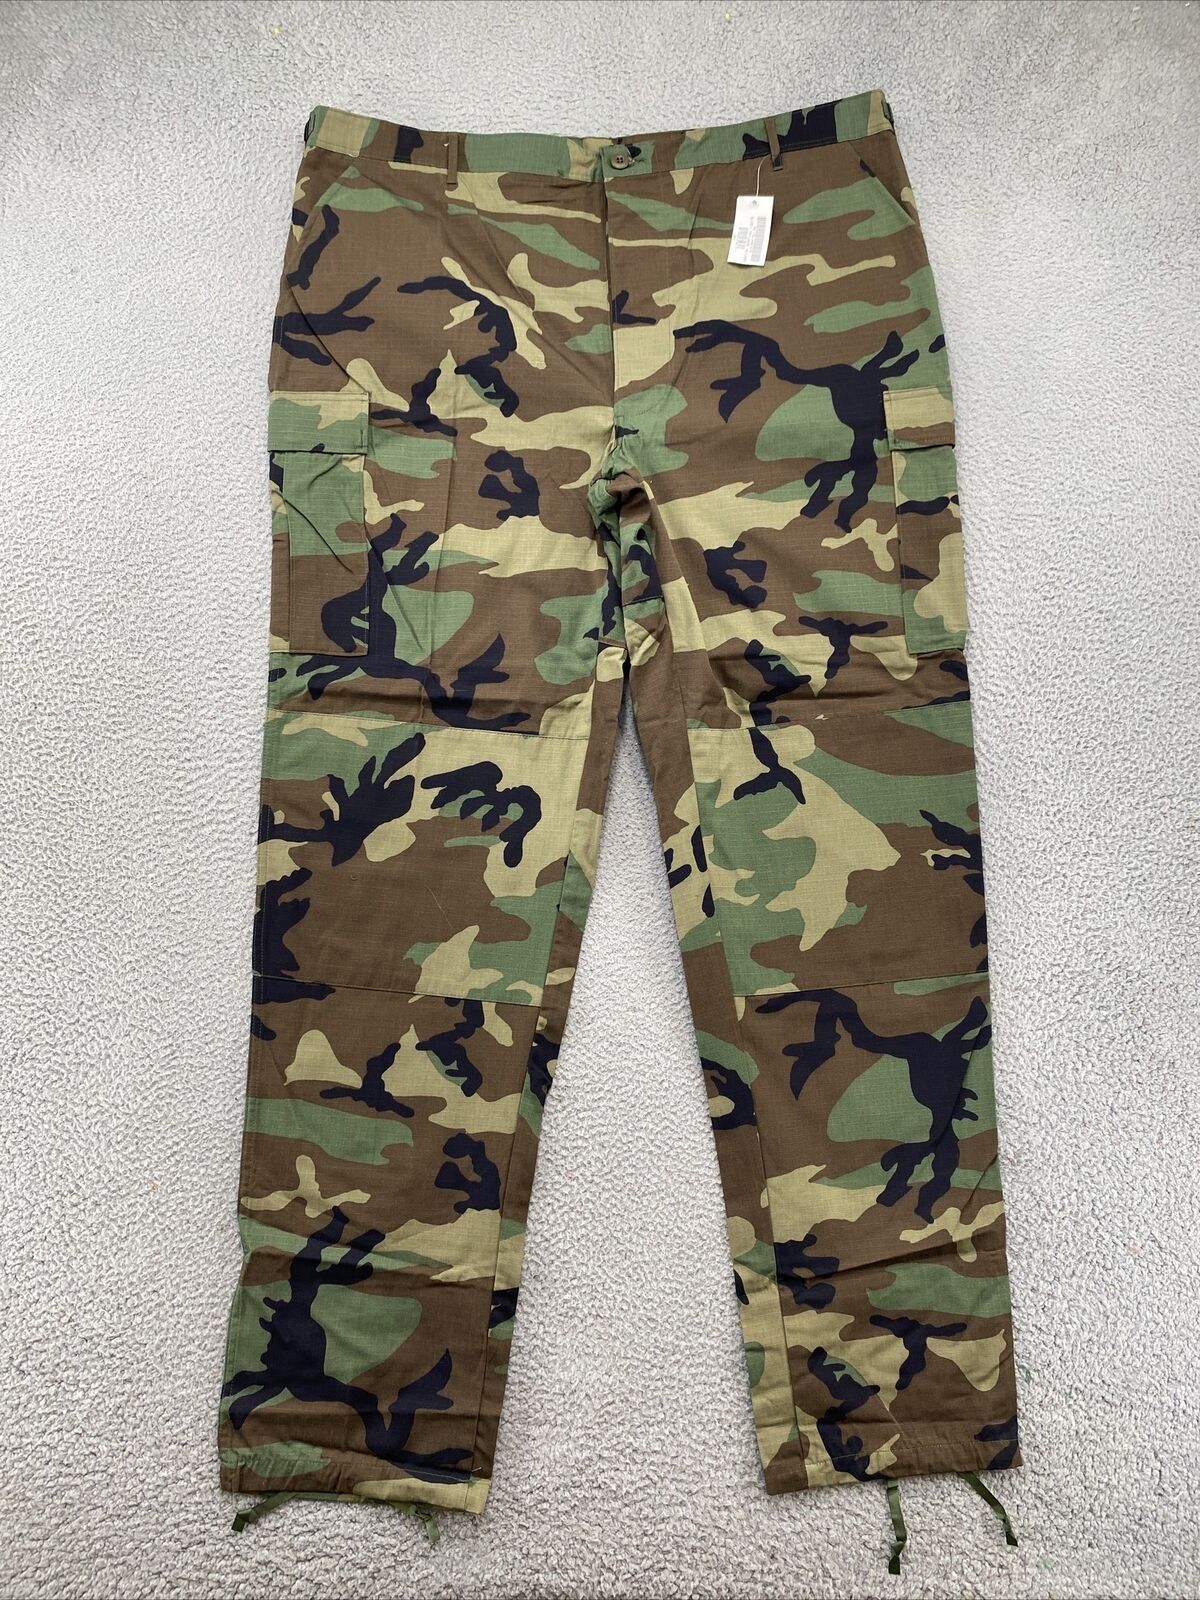 US Military BDU Woodland Camo Hot Weather Button Fly Pants Size 2XL XX Long NEW